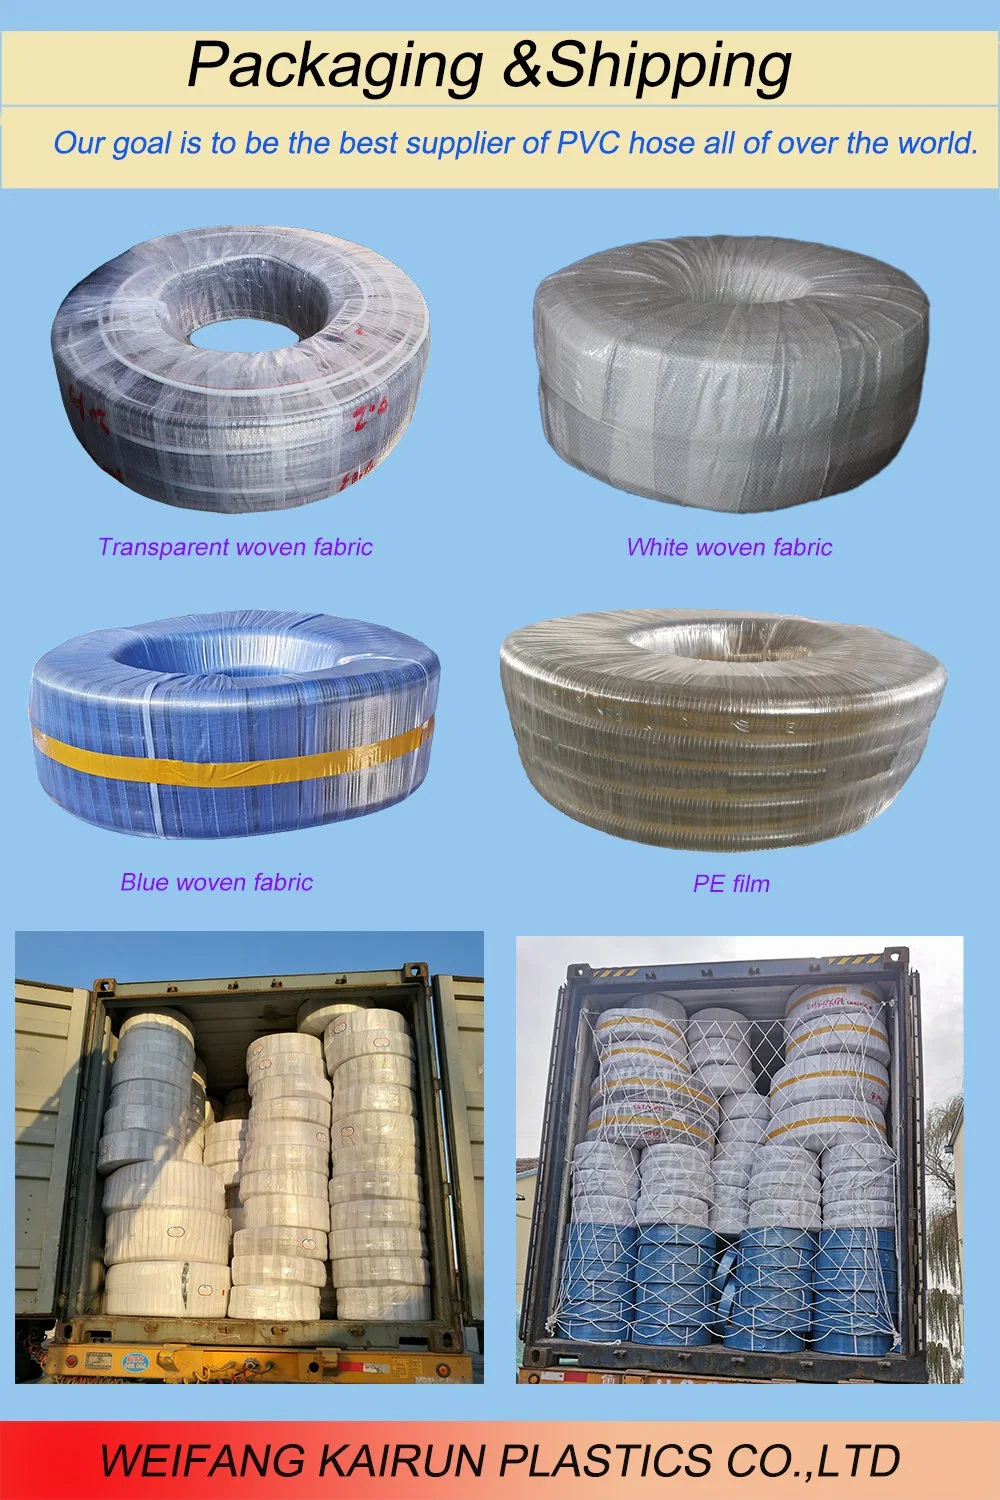 3/8-8inch Clear/Transparent Plastic Steel Wire Reinforced Suction Hose PVC Plastic Spiral Steel Wire Reinforced Suction/Discharge Water/Oil Soft Hose/Pipe